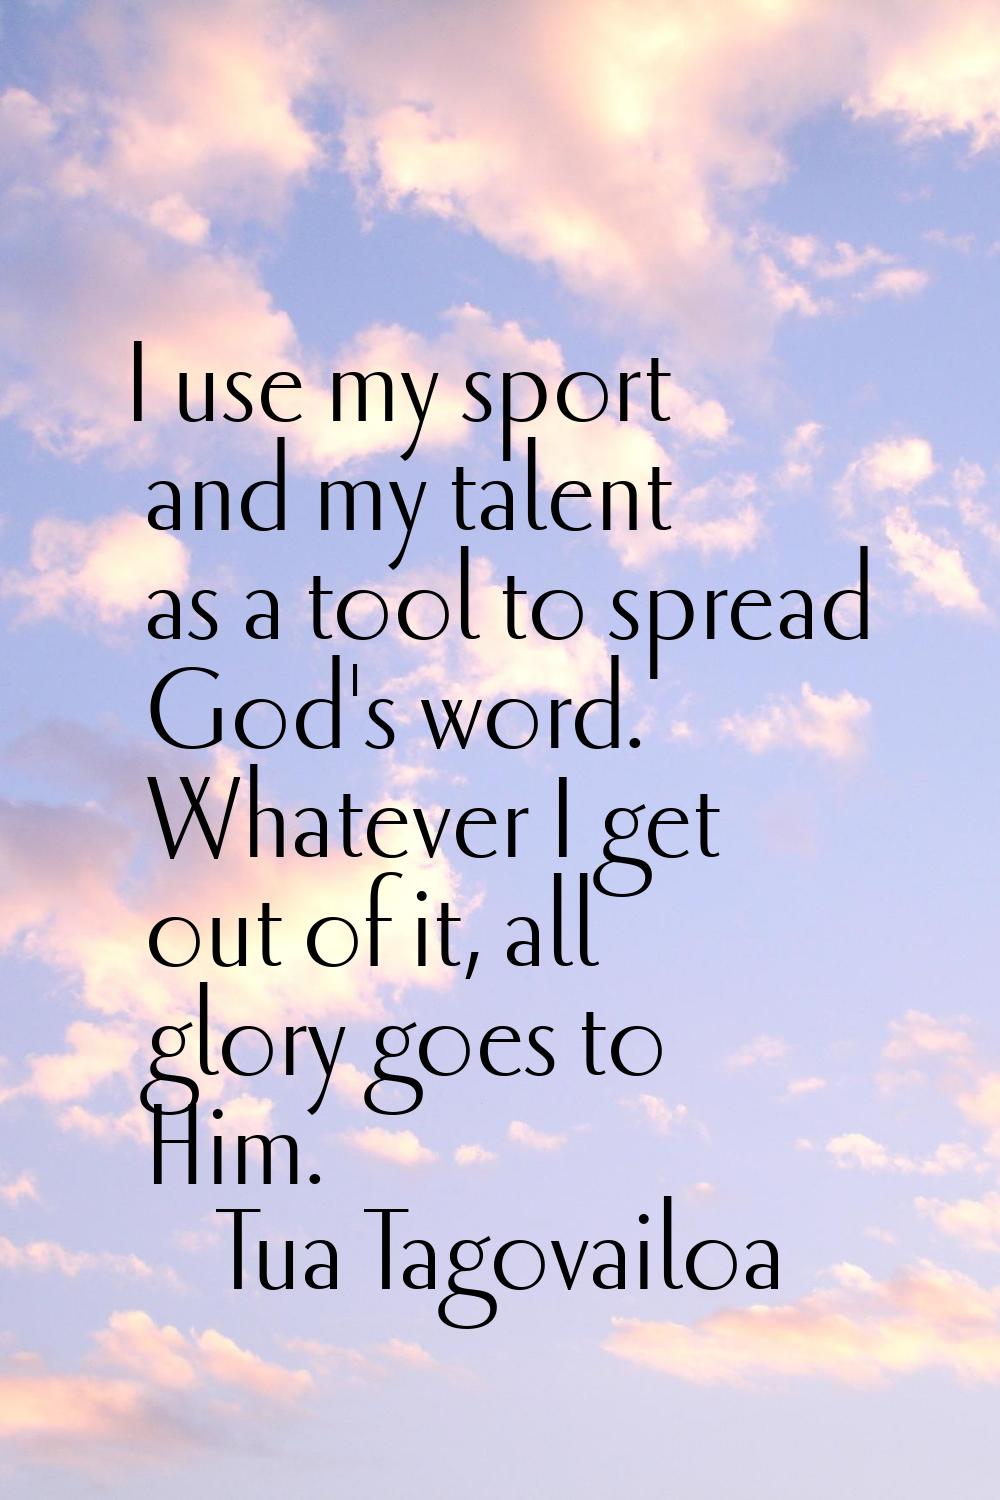 I use my sport and my talent as a tool to spread God's word. Whatever I get out of it, all glory go